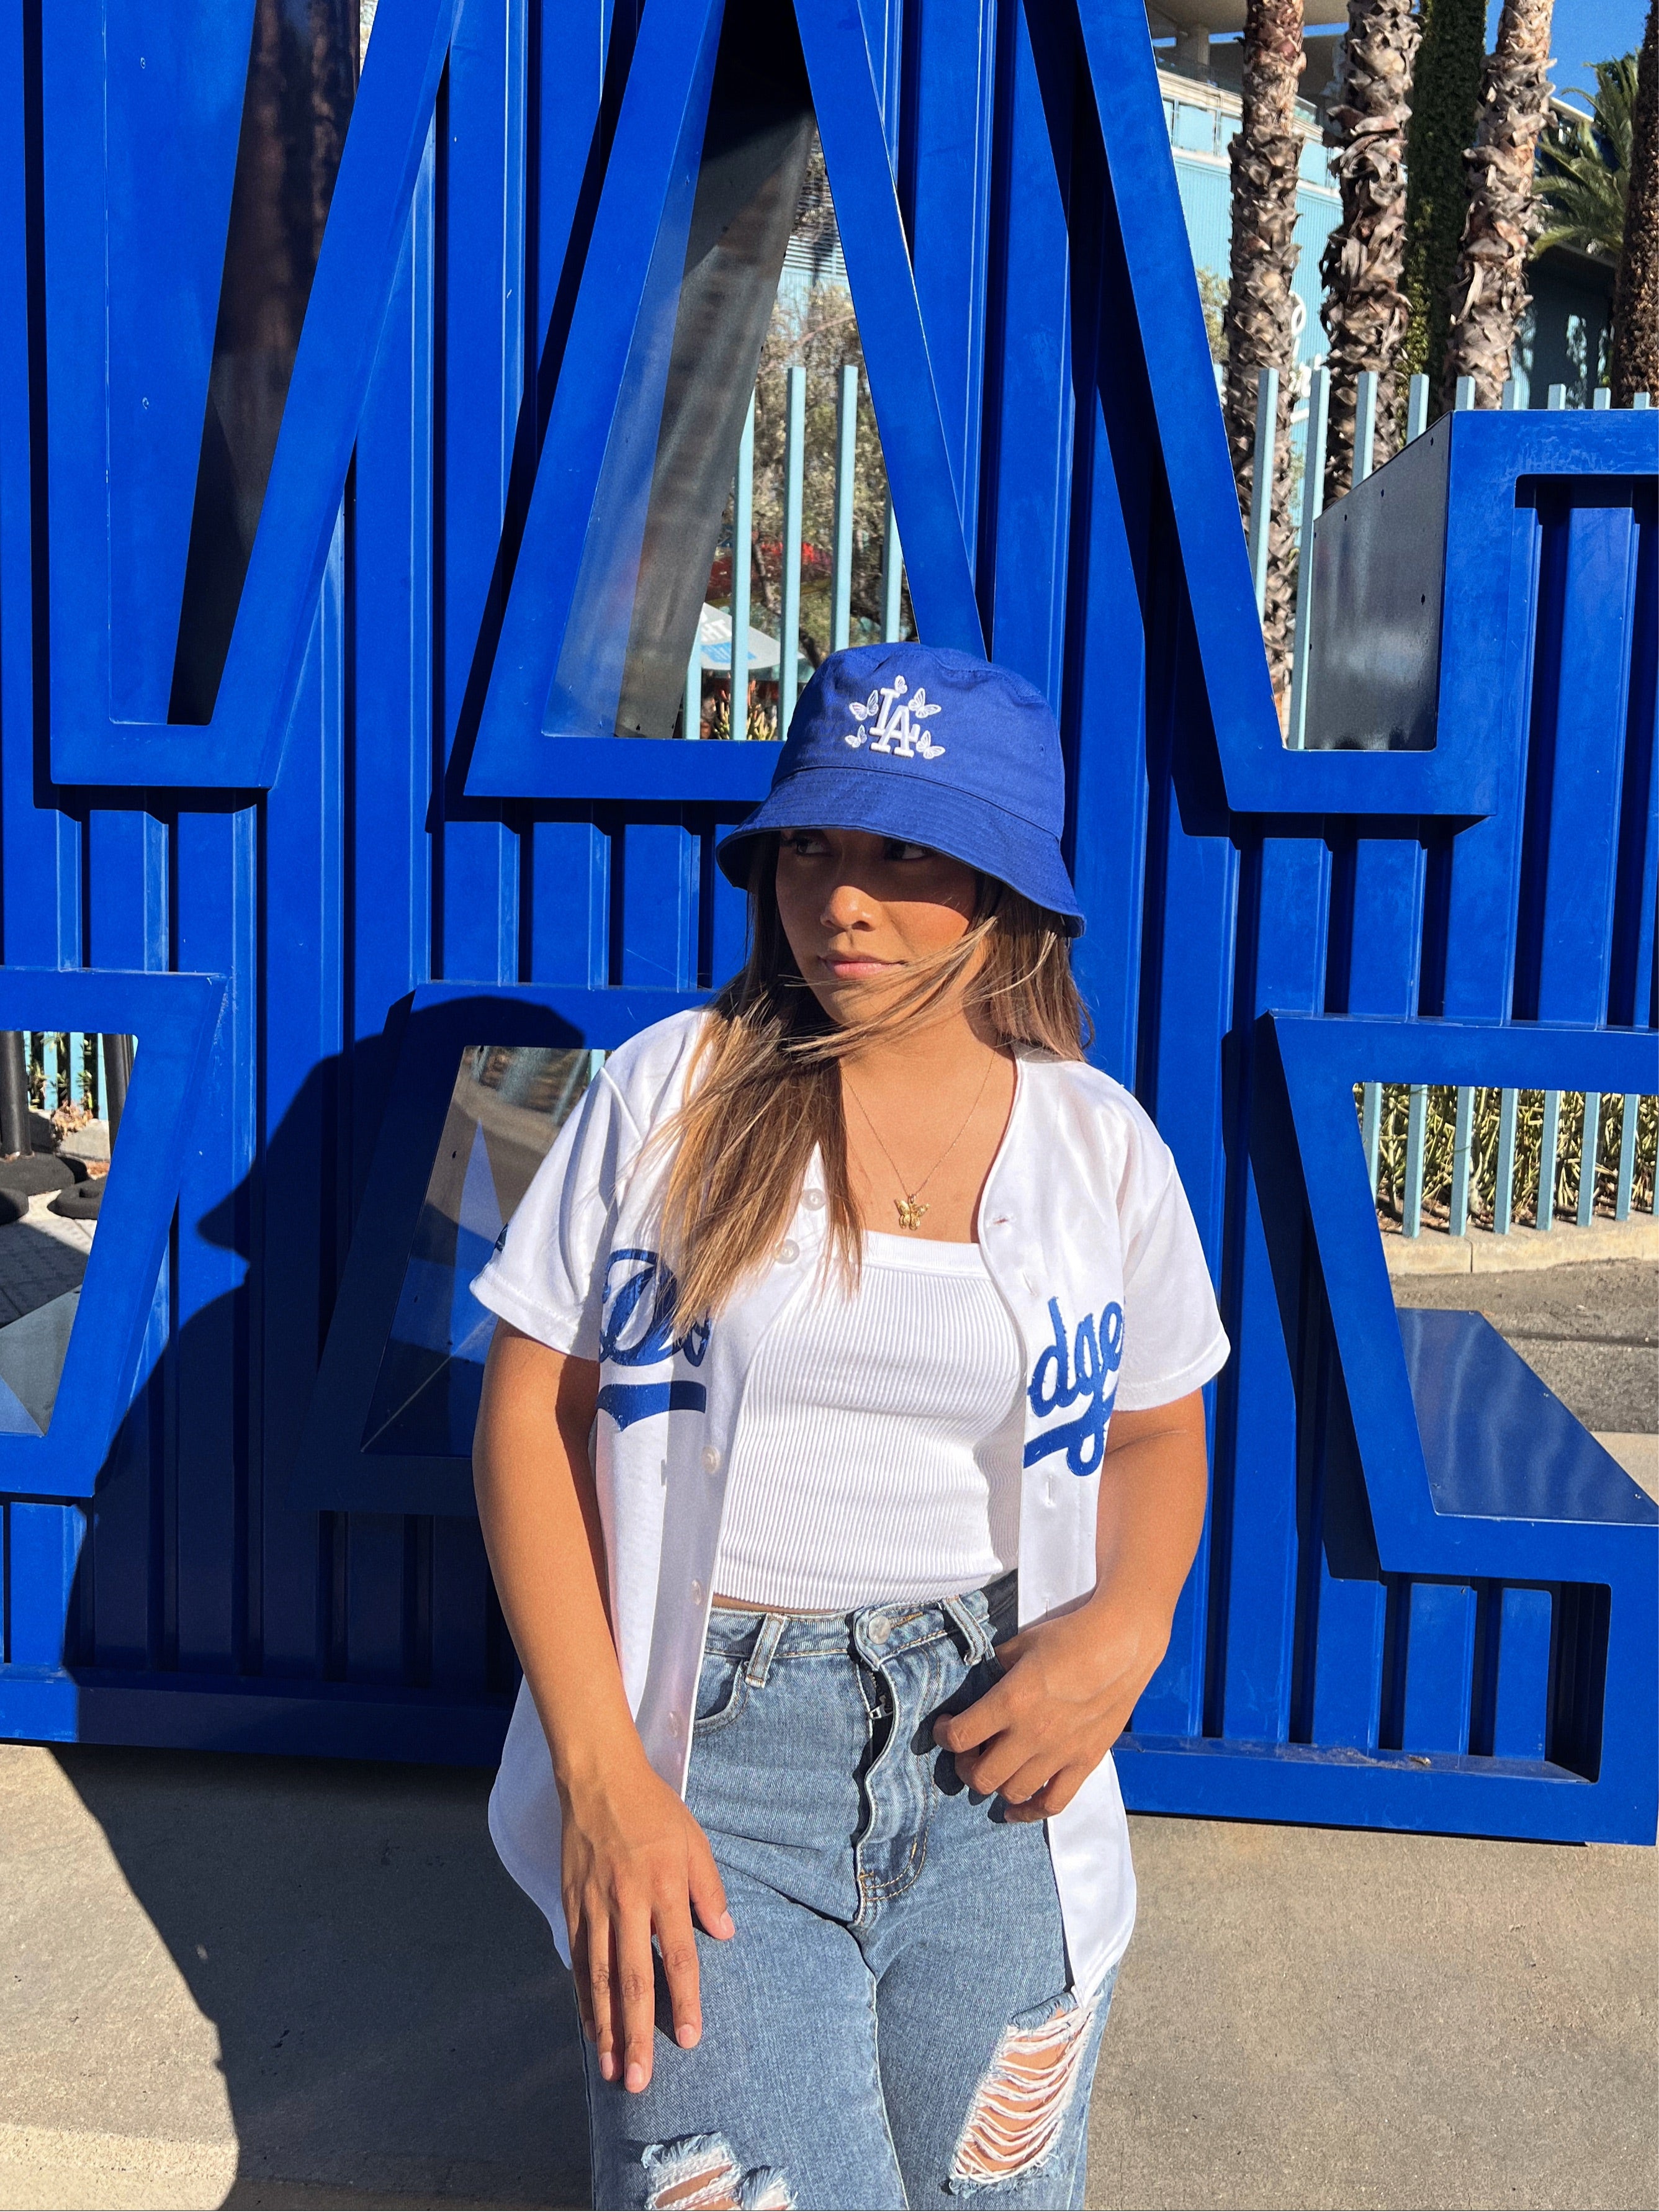 girl dodgers jersey outfit